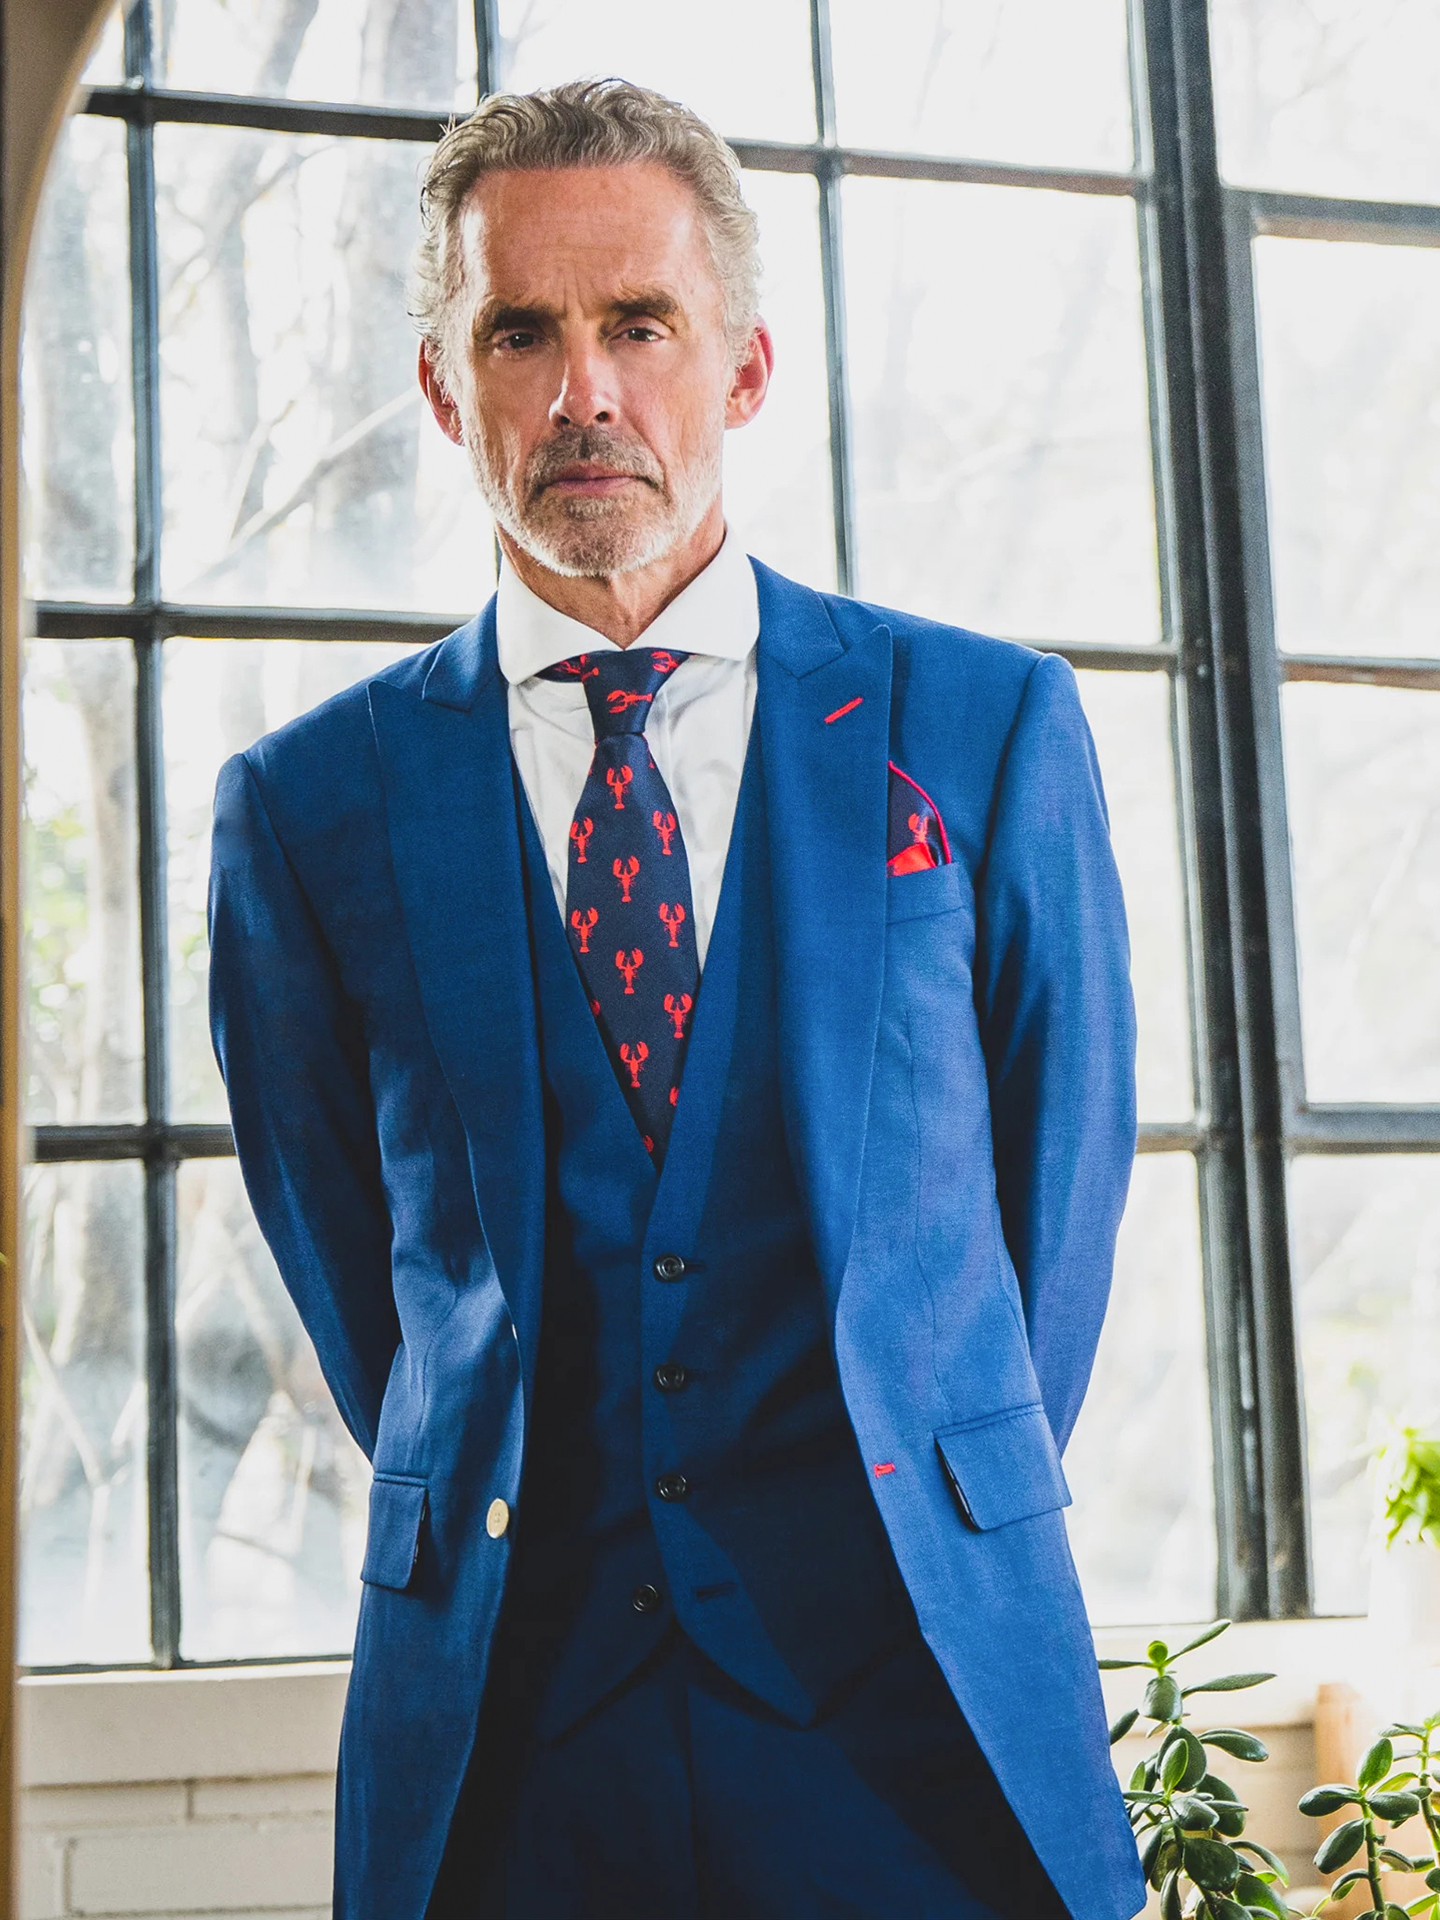 Jordan Peterson, 60 years old, wear a blue suit, white shirt, and navy/red patterned tie